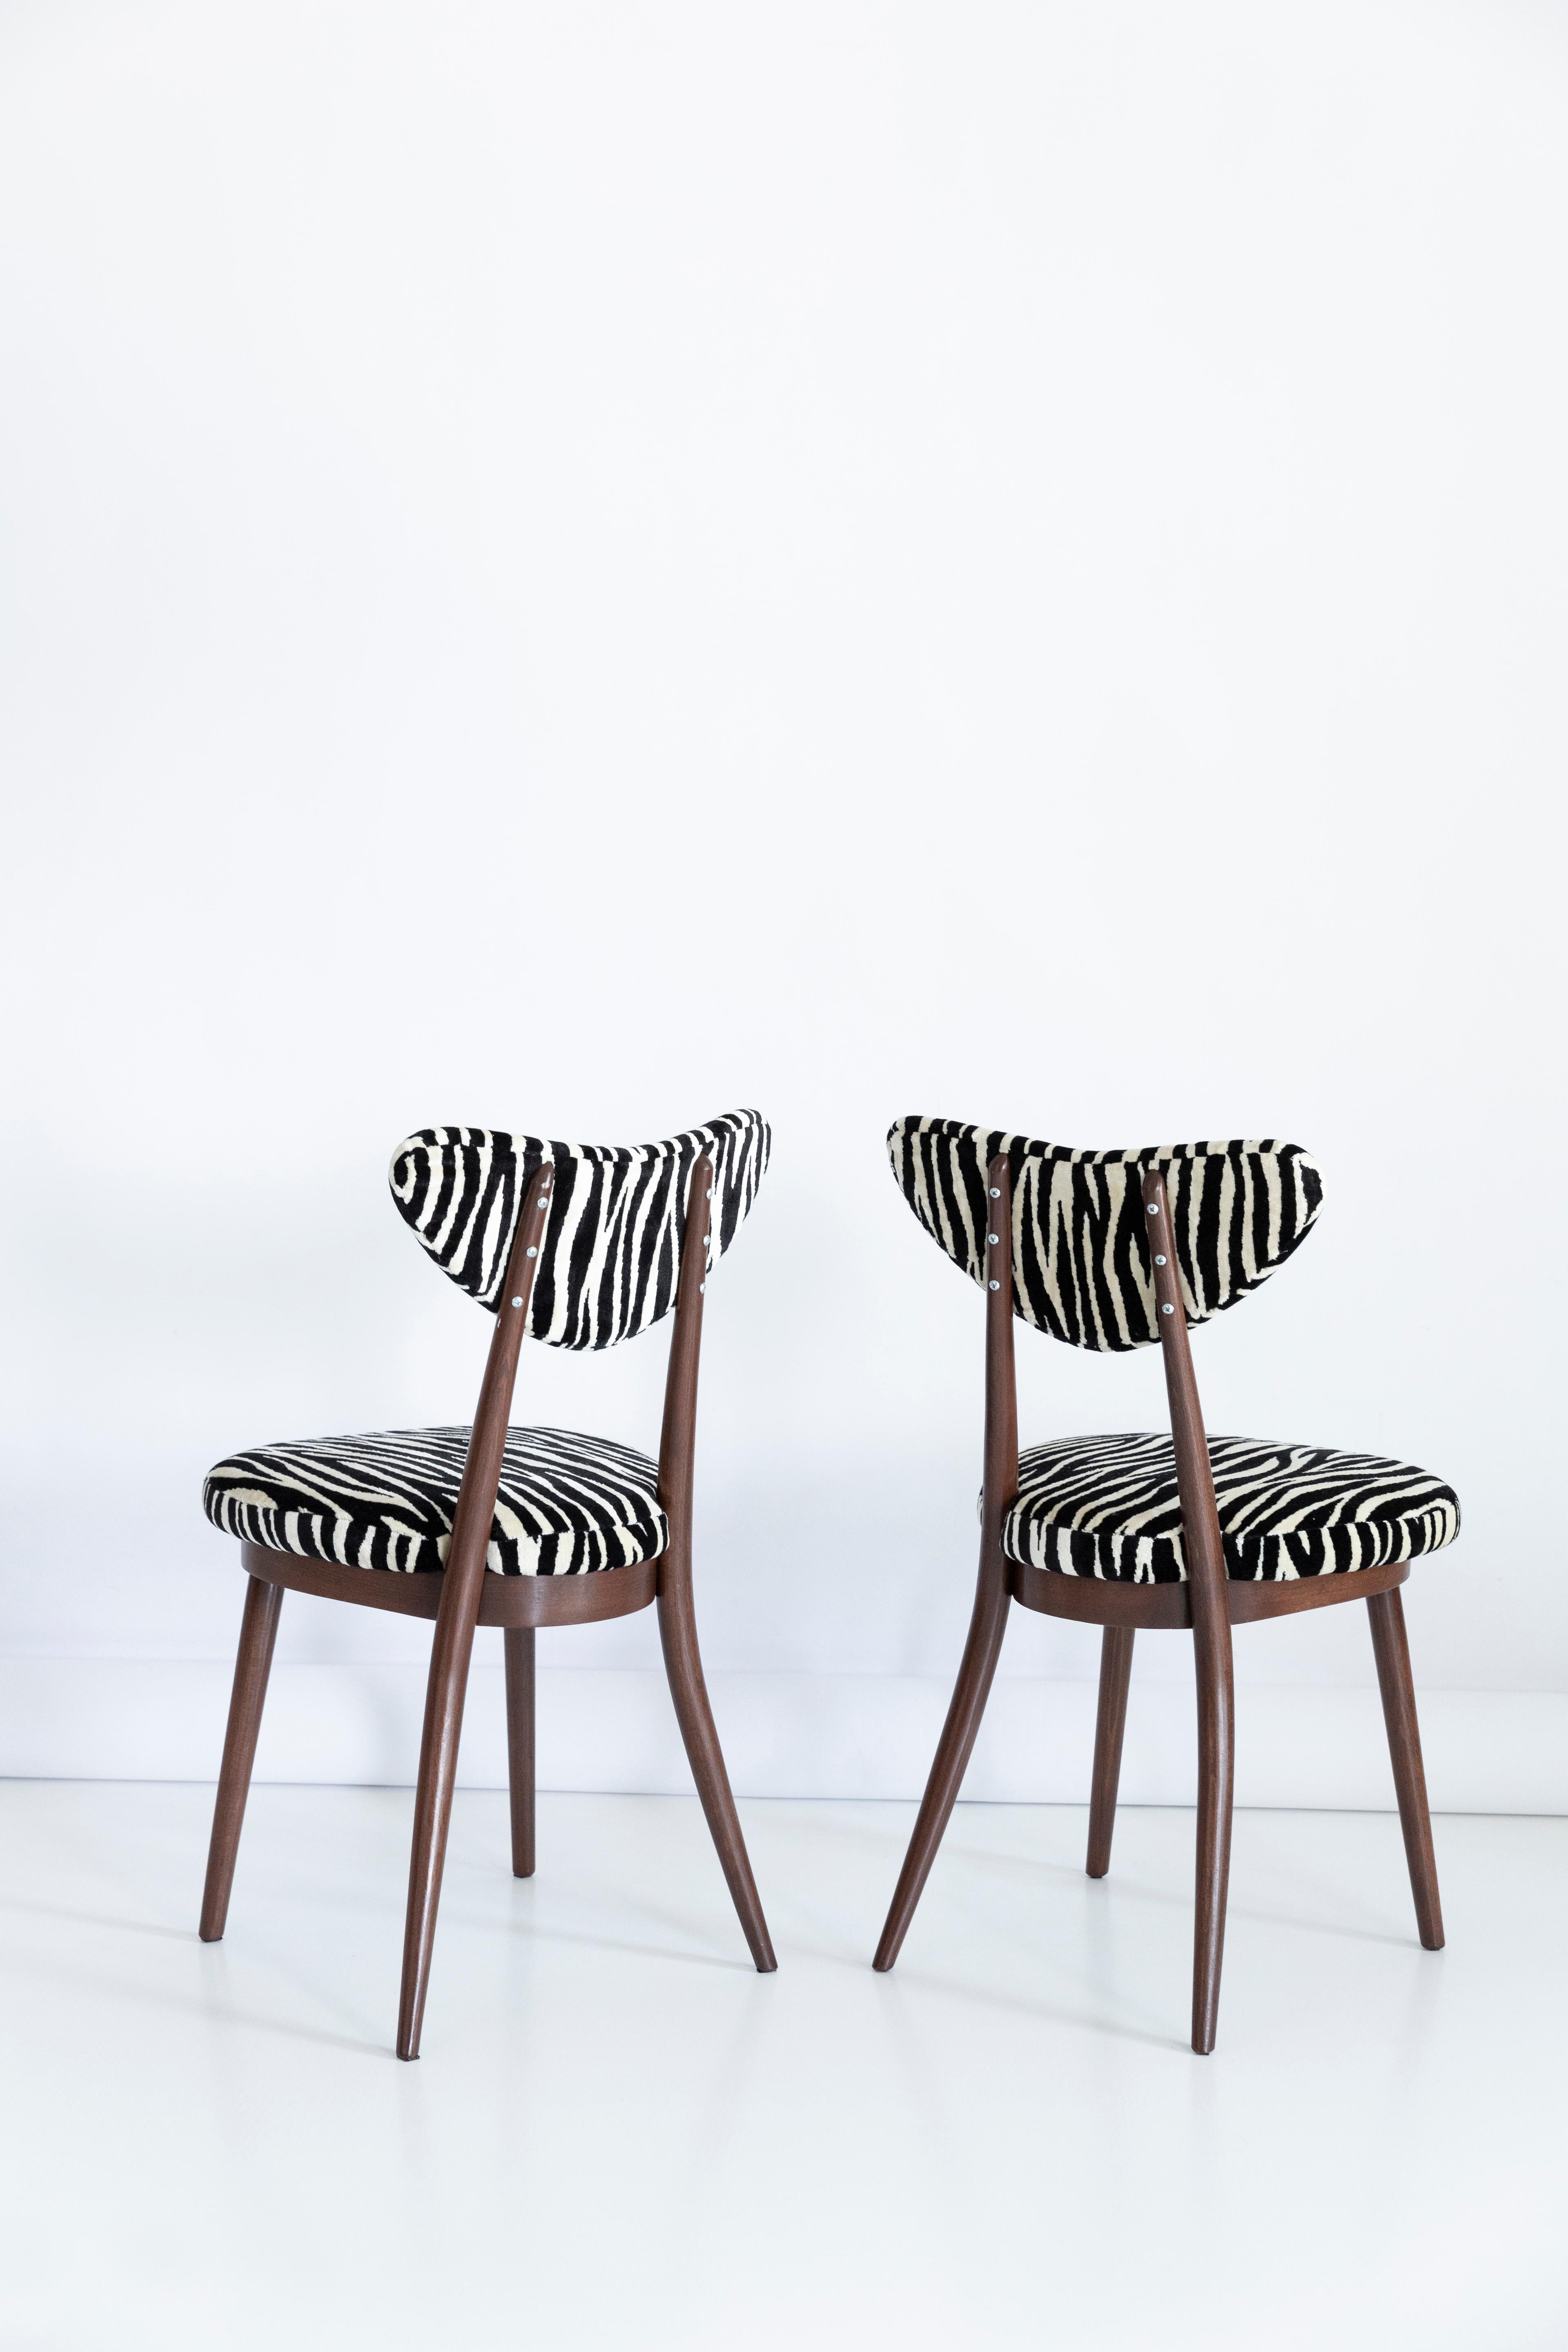 Hand-Crafted Set of Four Midcentury Zebra Black and White Heart Chairs, Poland, 1960s For Sale